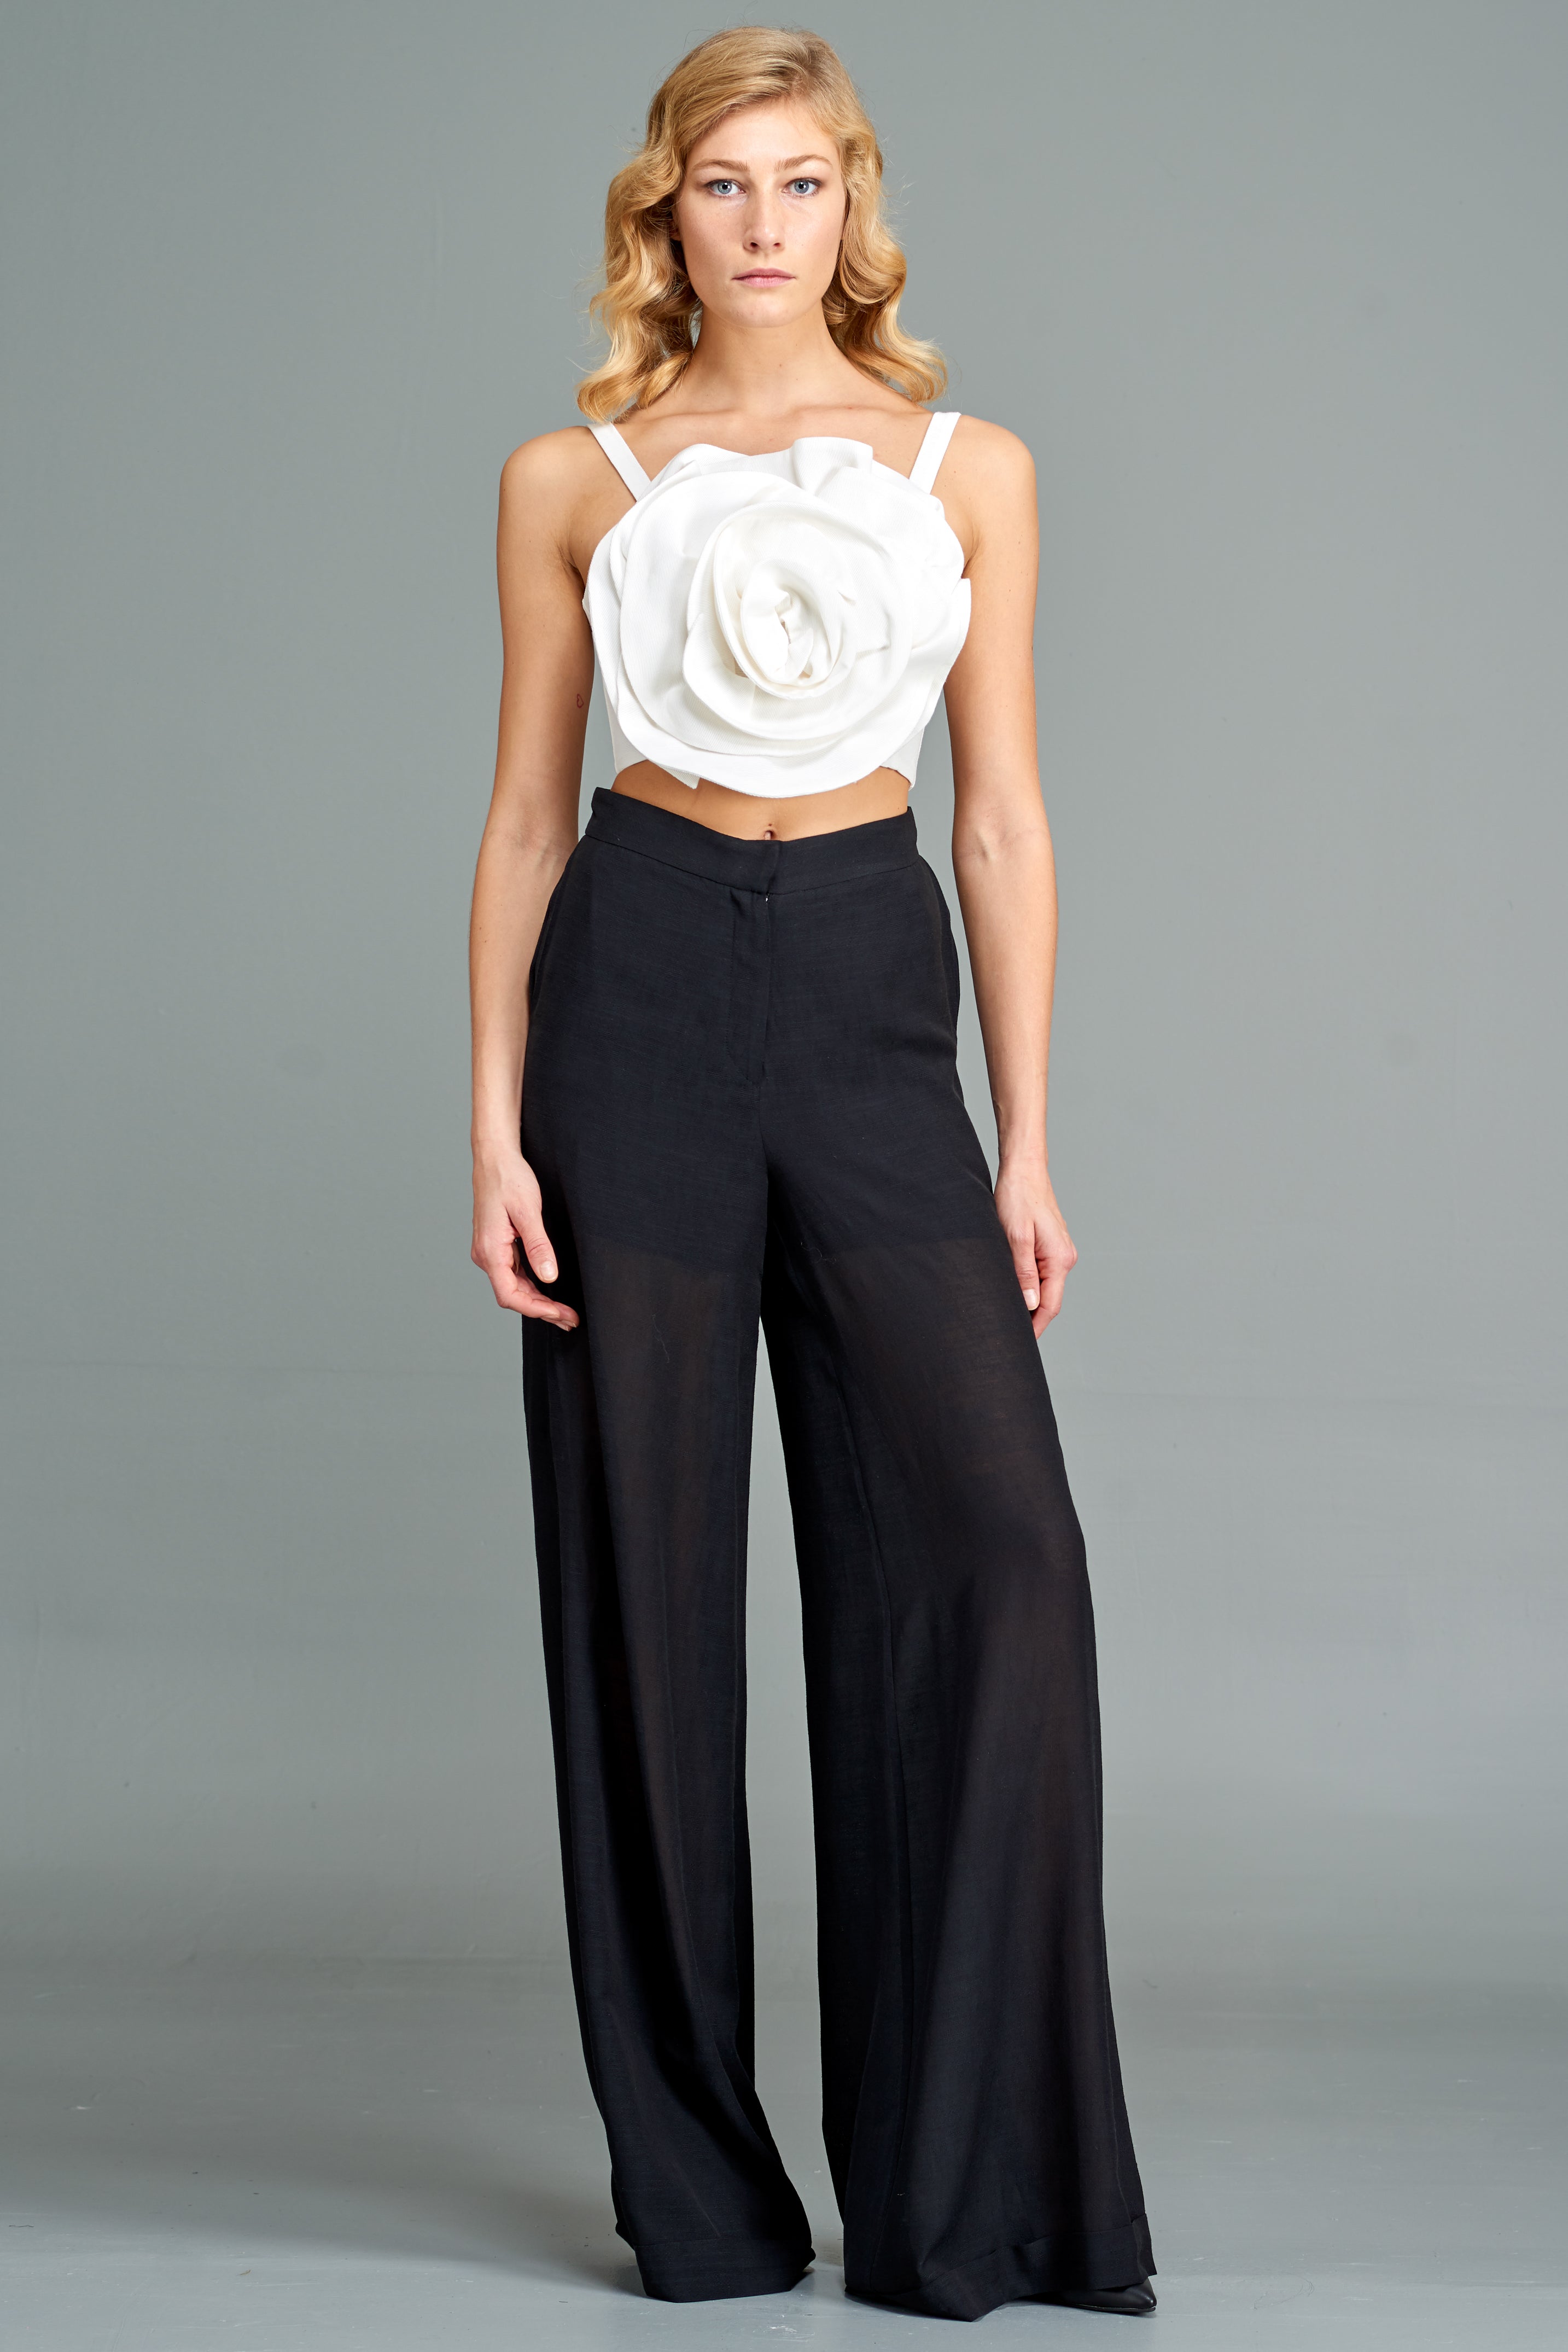 Rose Detailed Cotton Twill Crop Top with High-Waisted Jacquard Pant